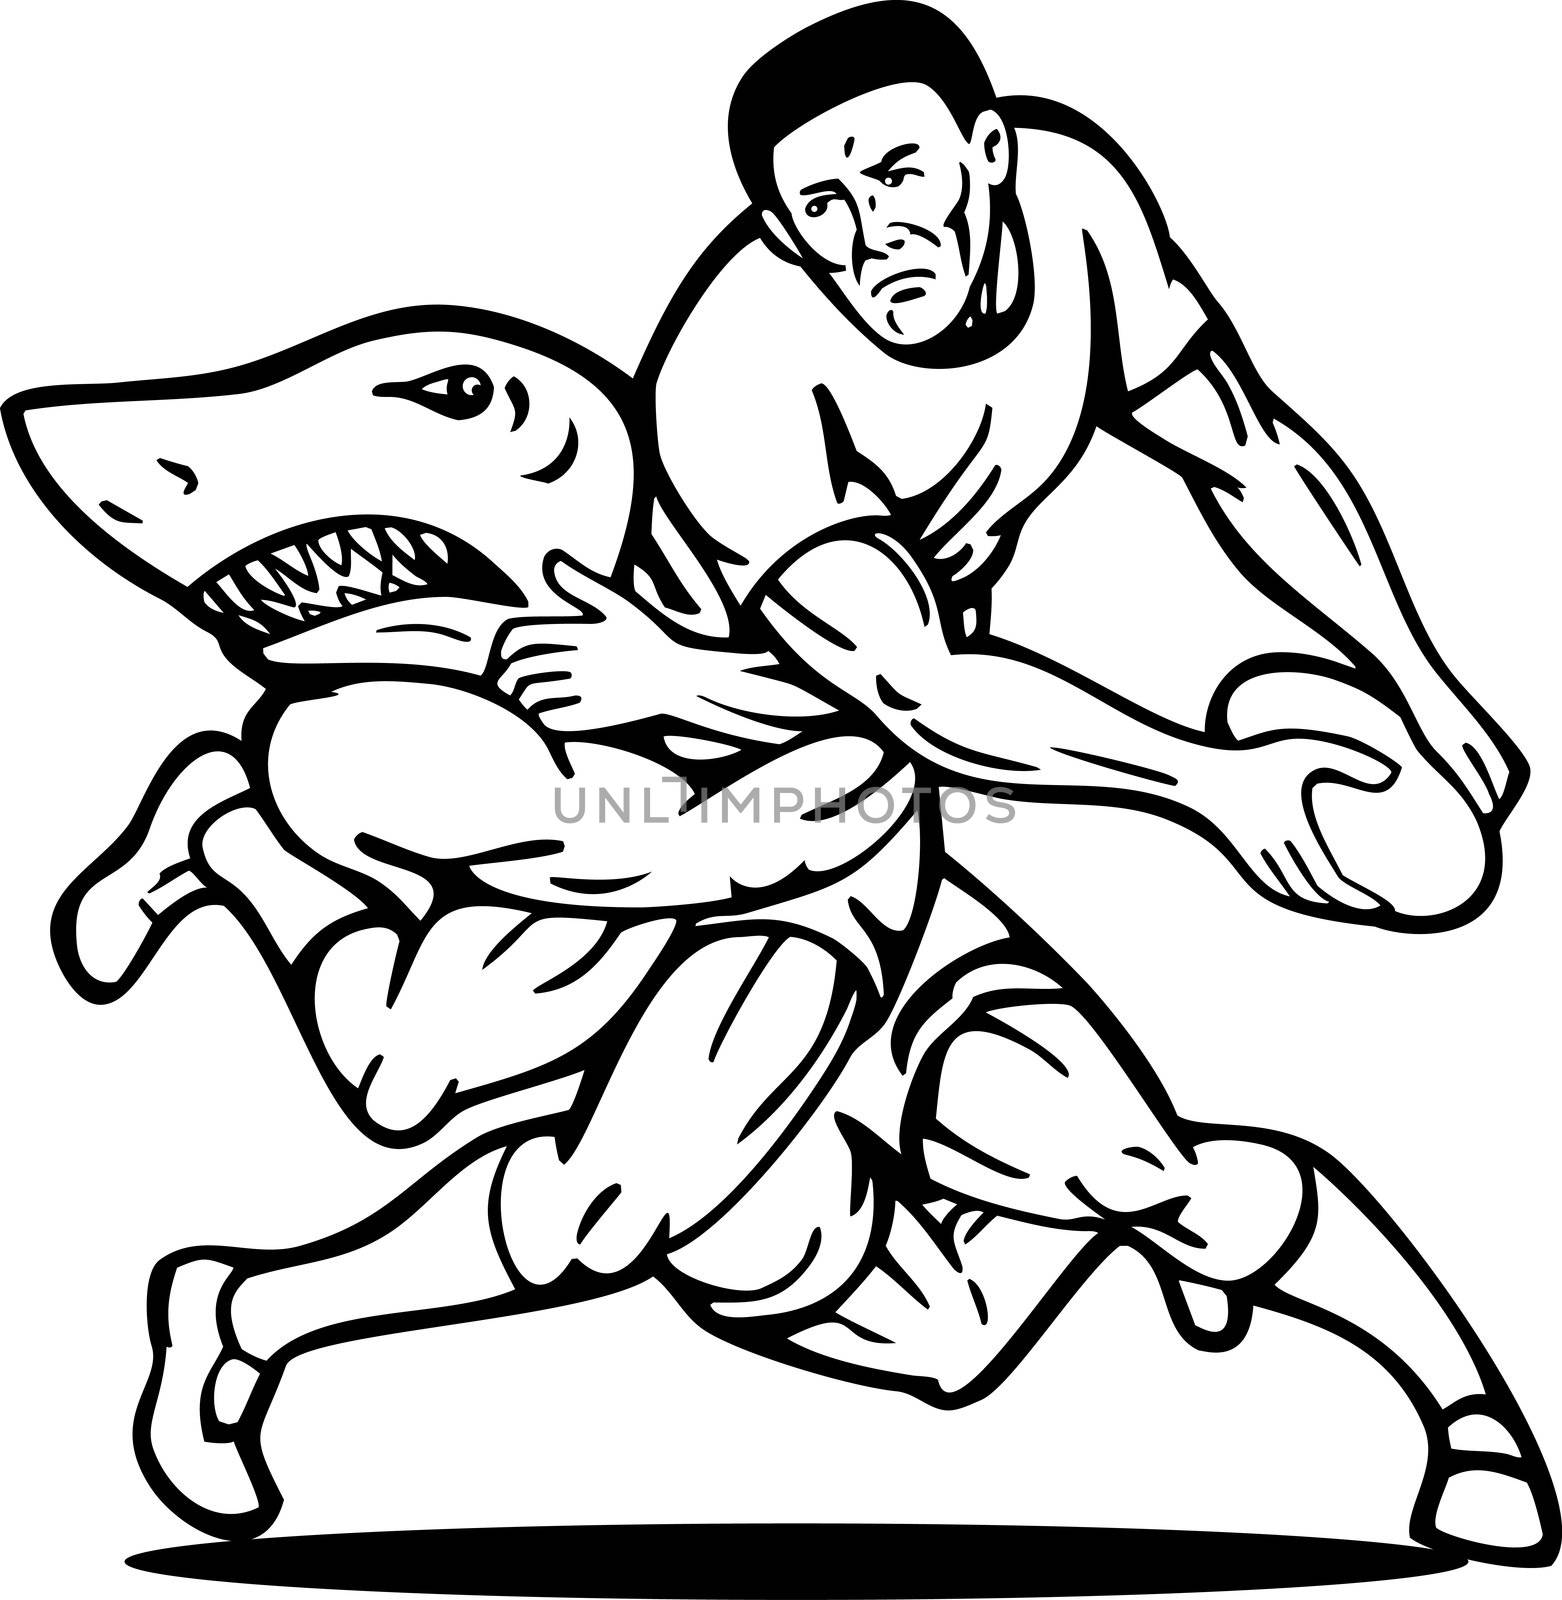 Rugby player passing ball tackled by shark by patrimonio